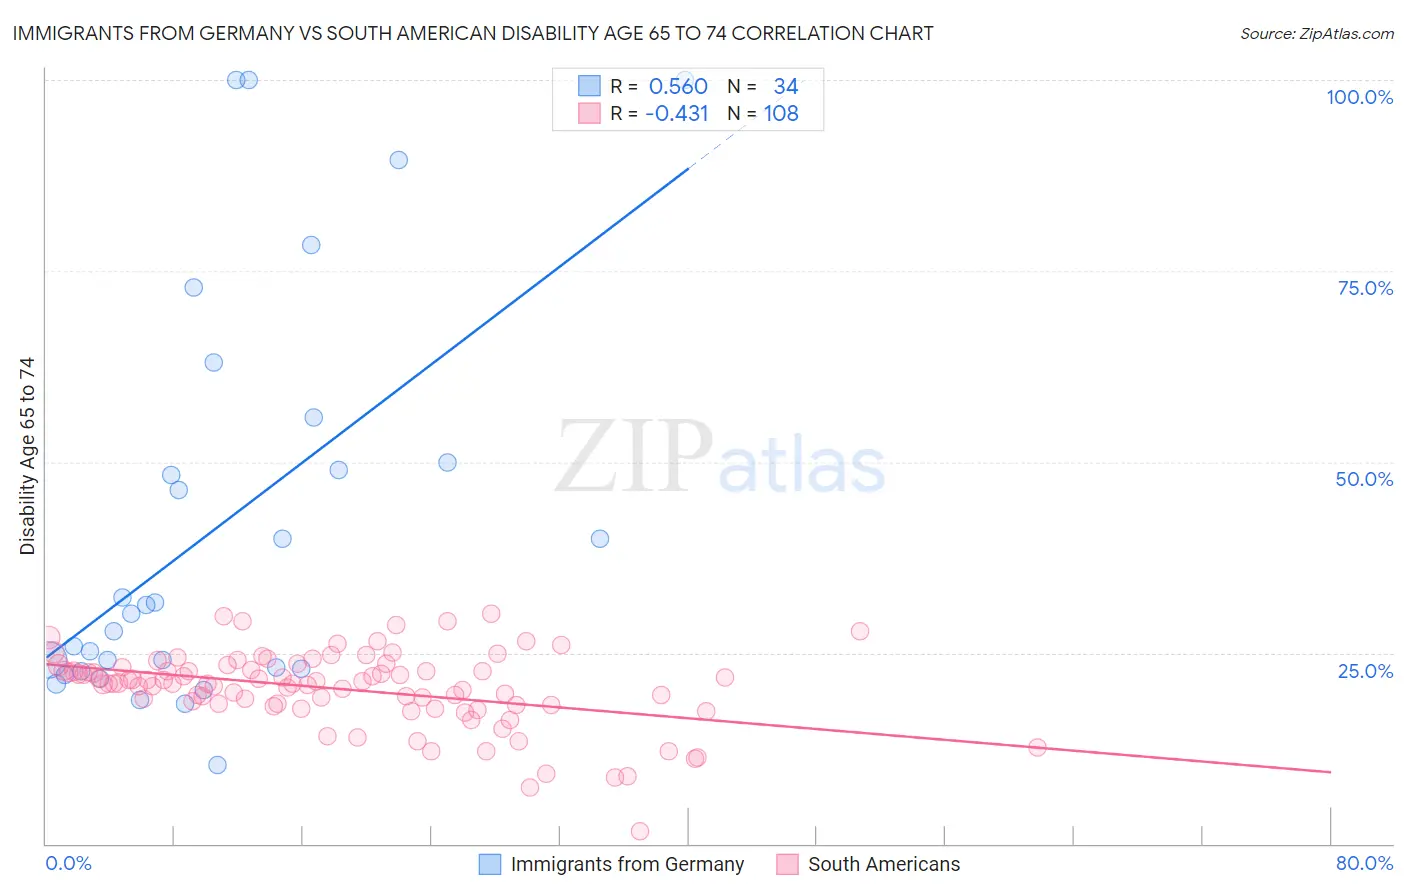 Immigrants from Germany vs South American Disability Age 65 to 74